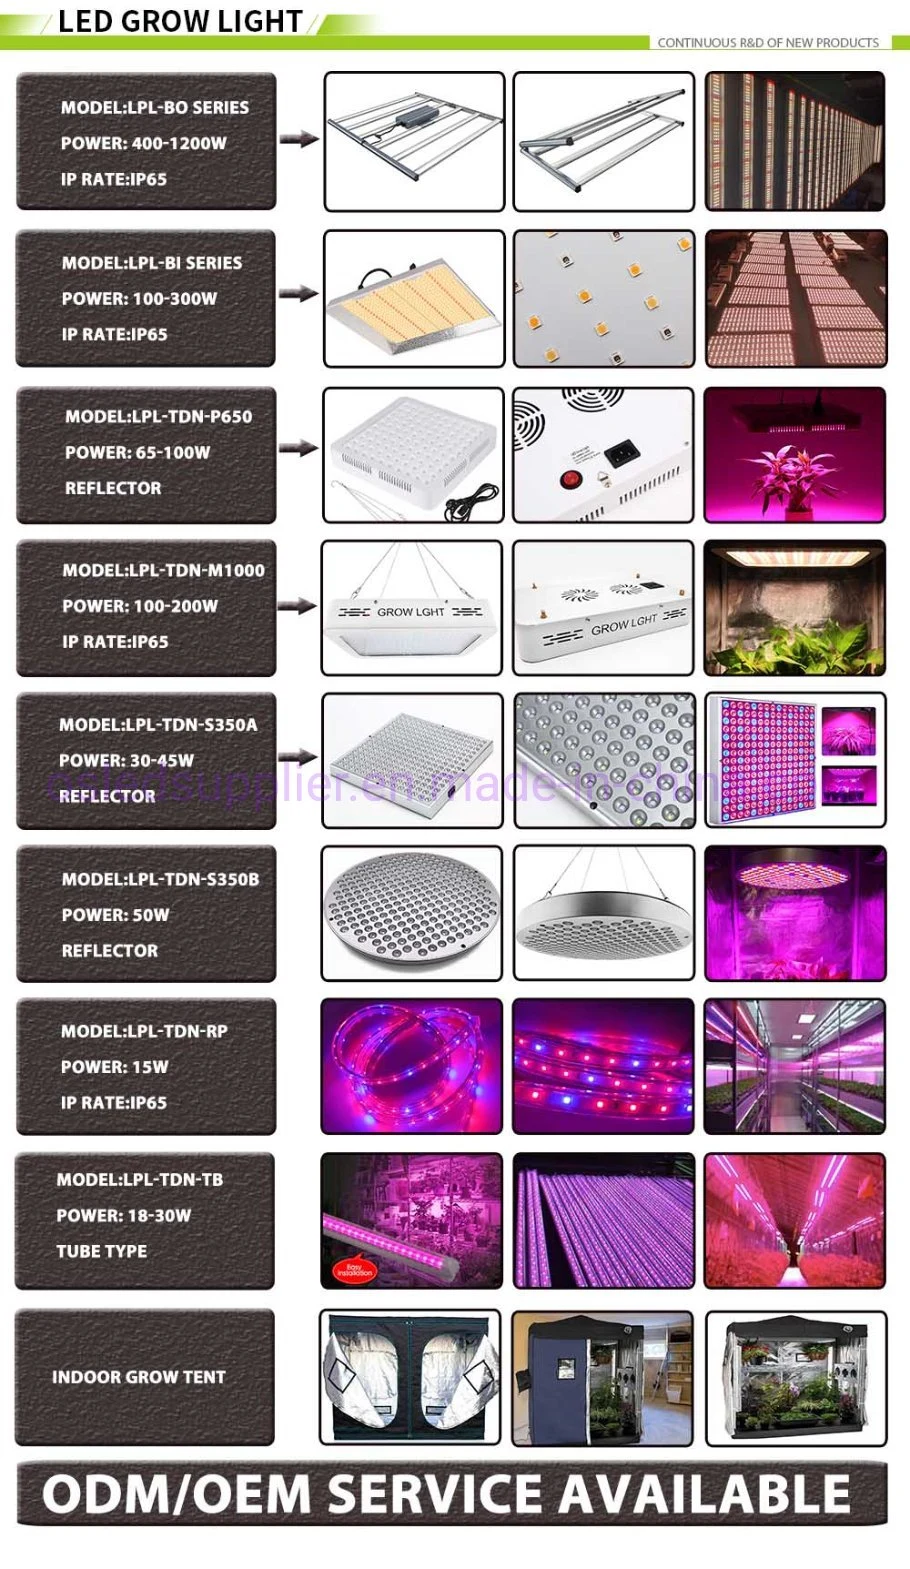 640W LED Grow Light, Full Spectrum Growing Lights for Indoor Plants Veg Flower Greenhouse Bloom 4X4 FT Panel Grow Lamp with 760nm IR & UV LED Plant Lights for H